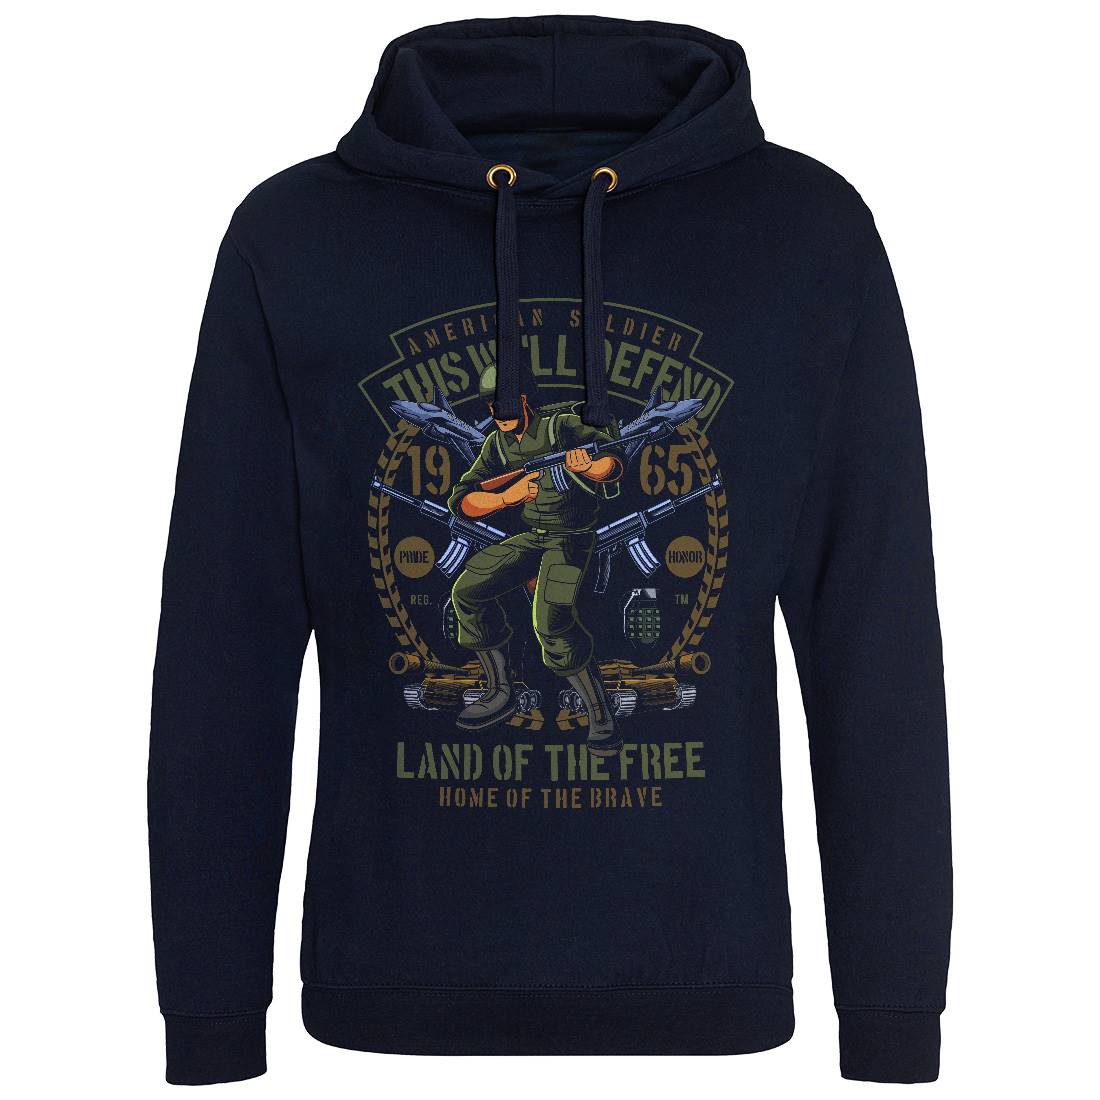 American Soldier Mens Hoodie Without Pocket Army C304